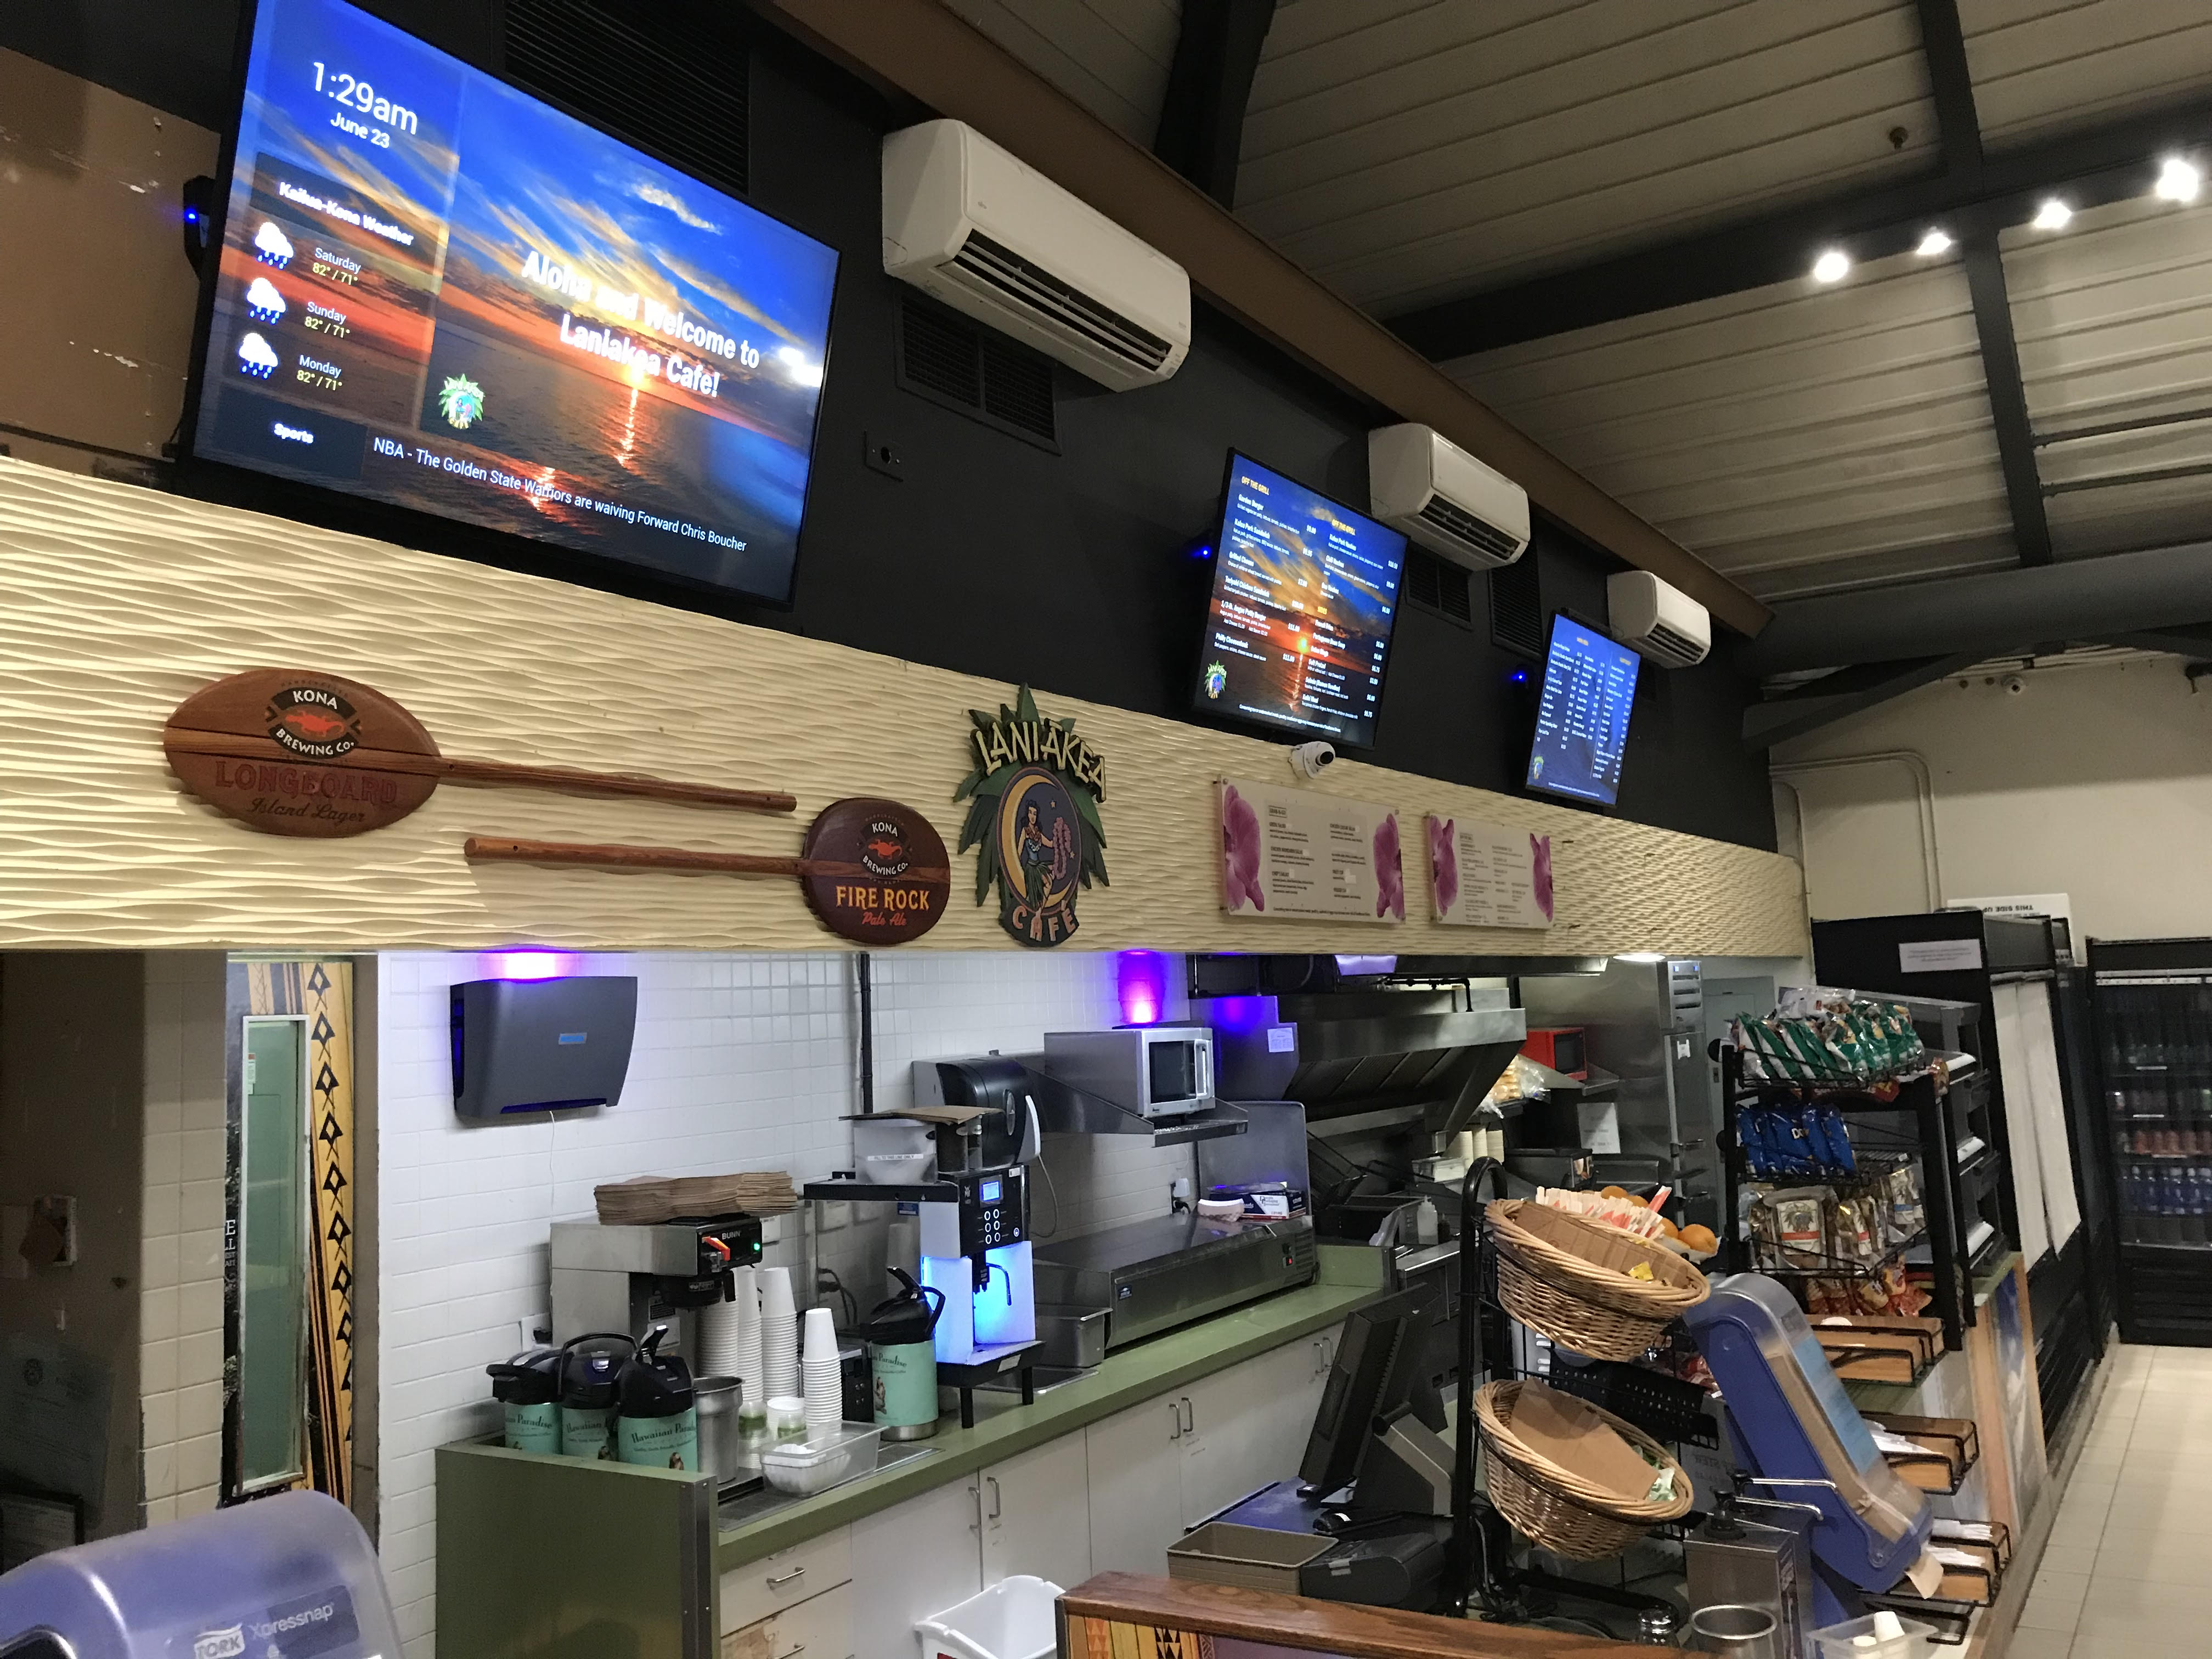 Bright Light Digital has experienced a consistent increase in digital menu board installations with younger consumers driving the demand.